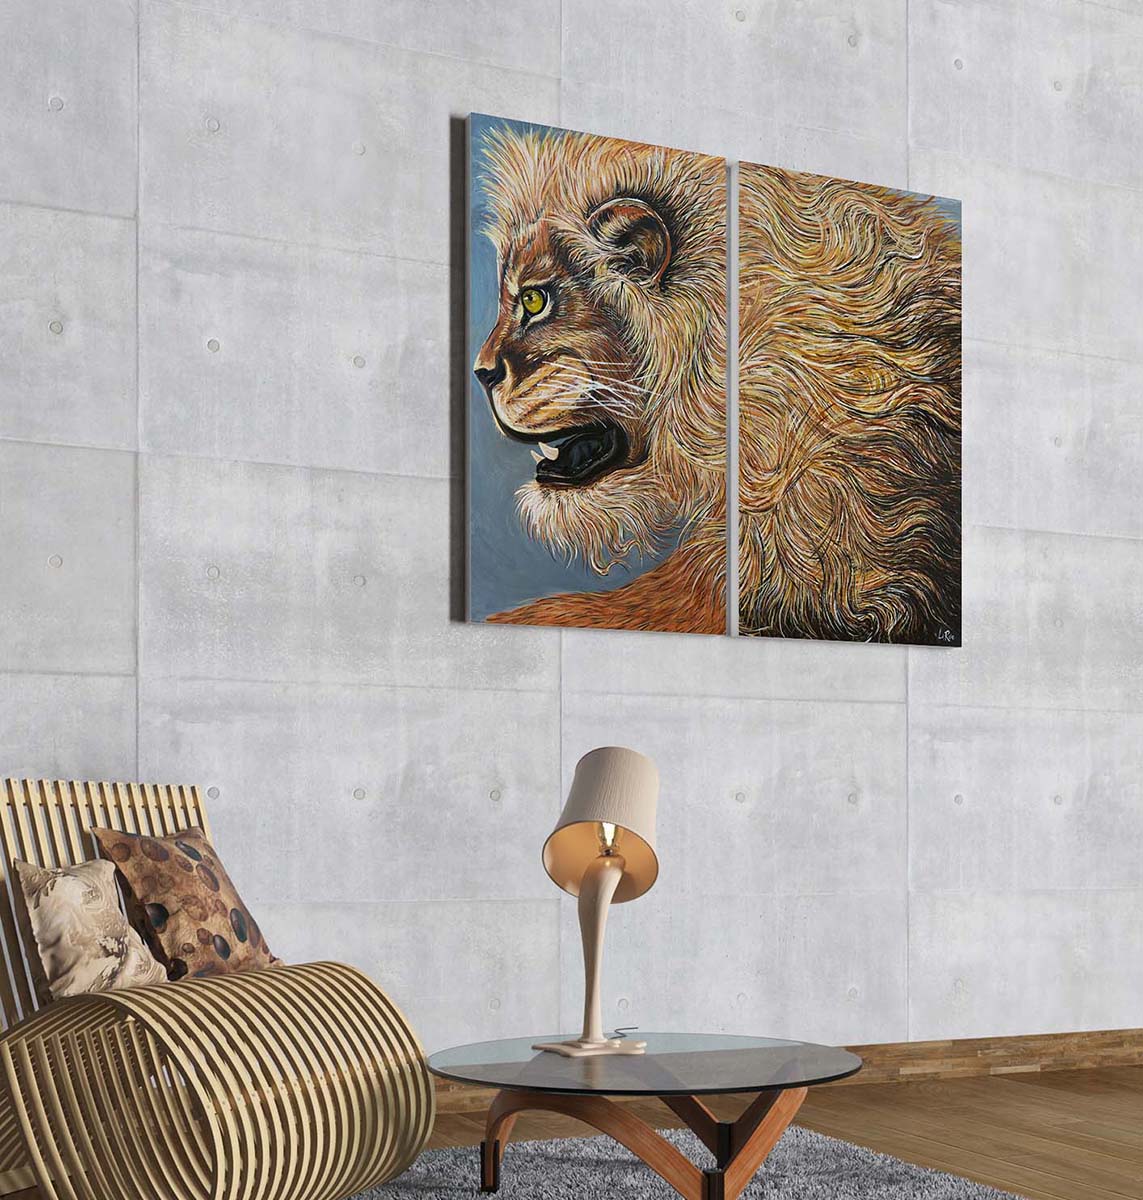 Large 2 panel art print of Golden Lion painting by Doug LaRue on a wall over a wooden chair and coffee table